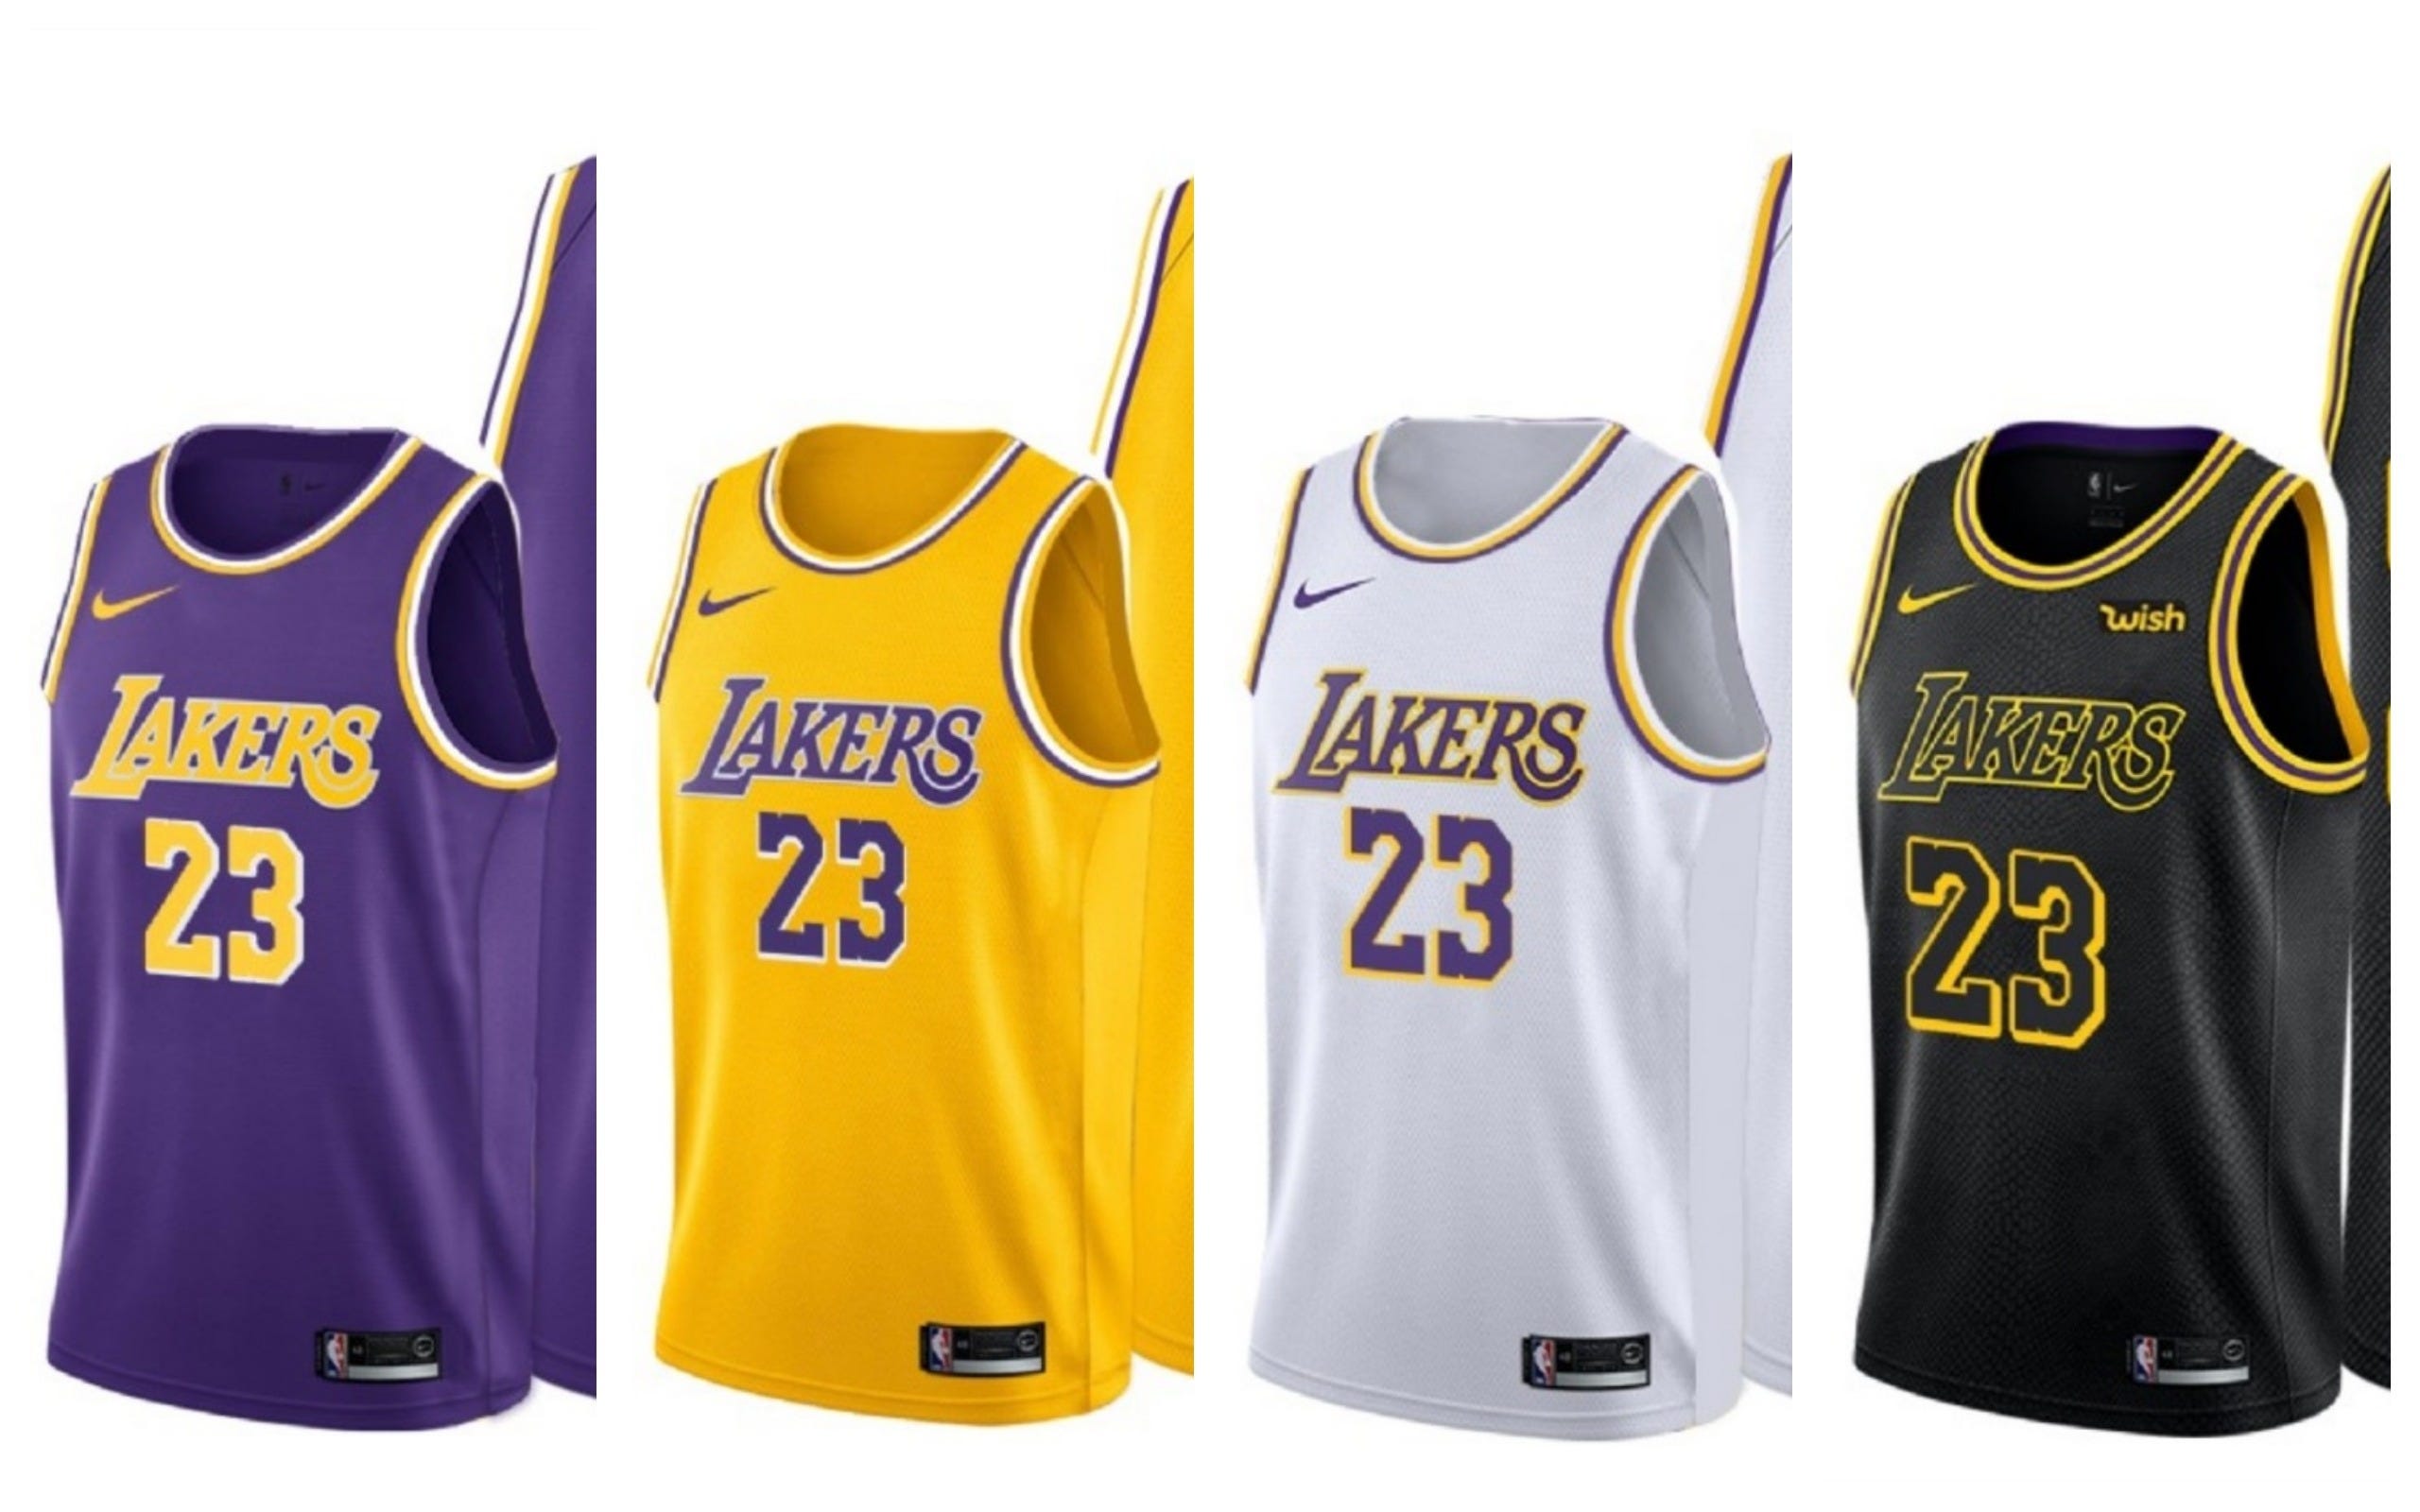 gear may hint changes to new Lakers jerseys